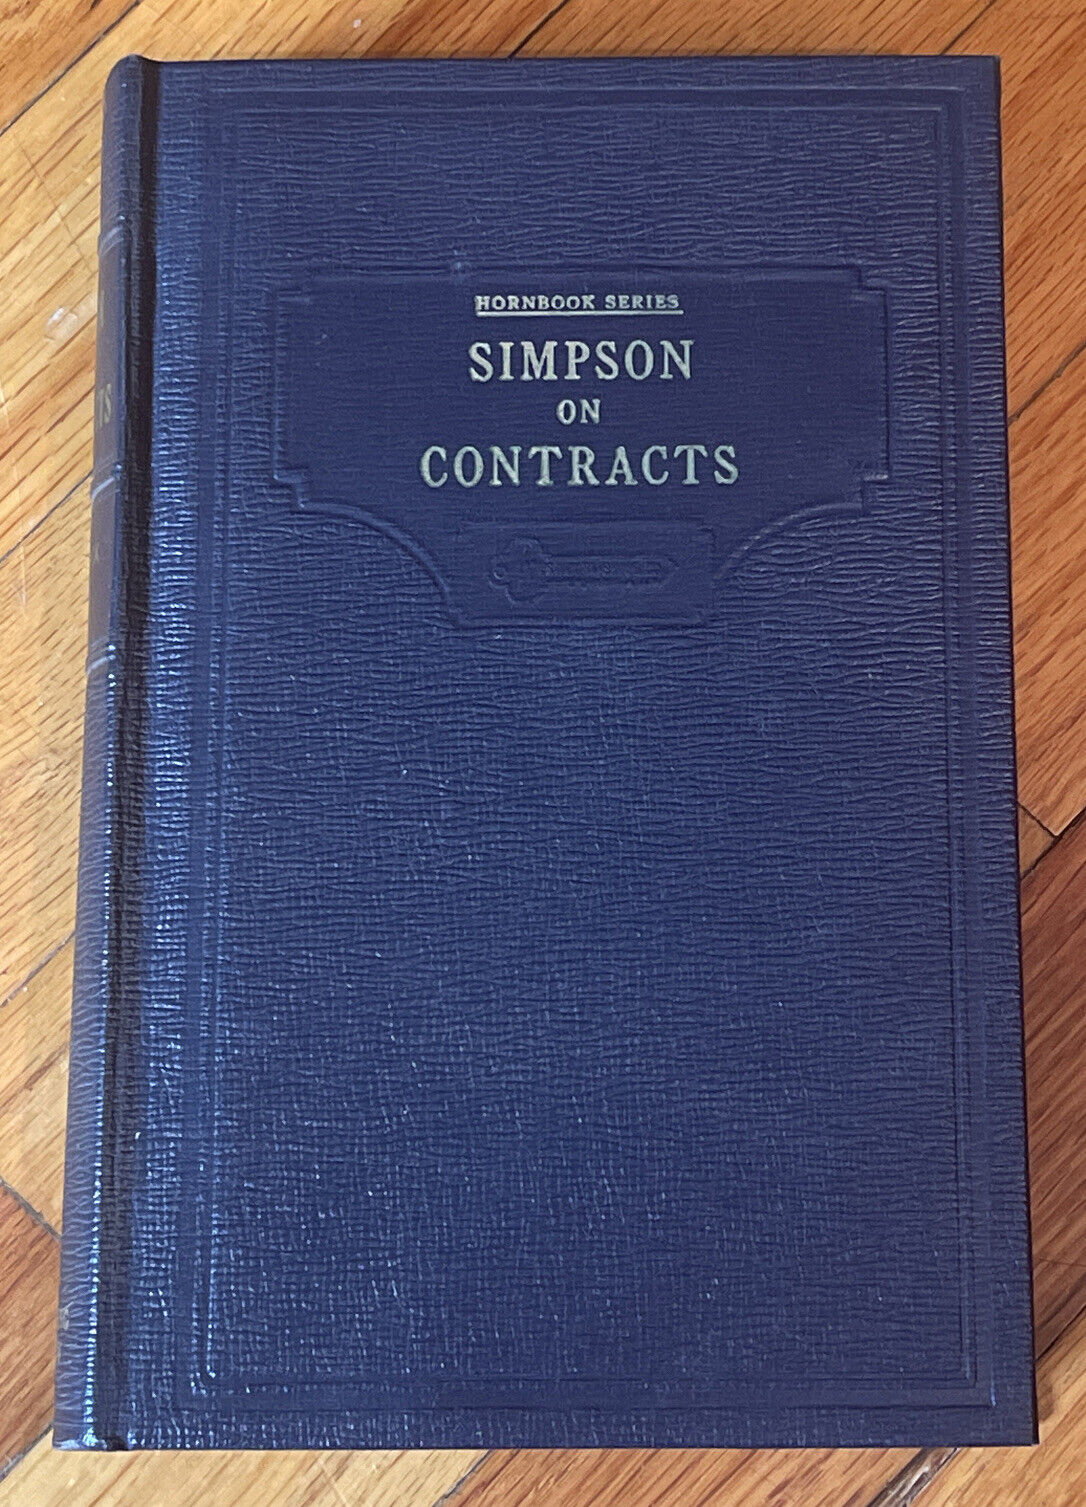 1954 Vintage Handbook of the Law of Contracts Lawrence Simpson Hornbook 1st Ed.